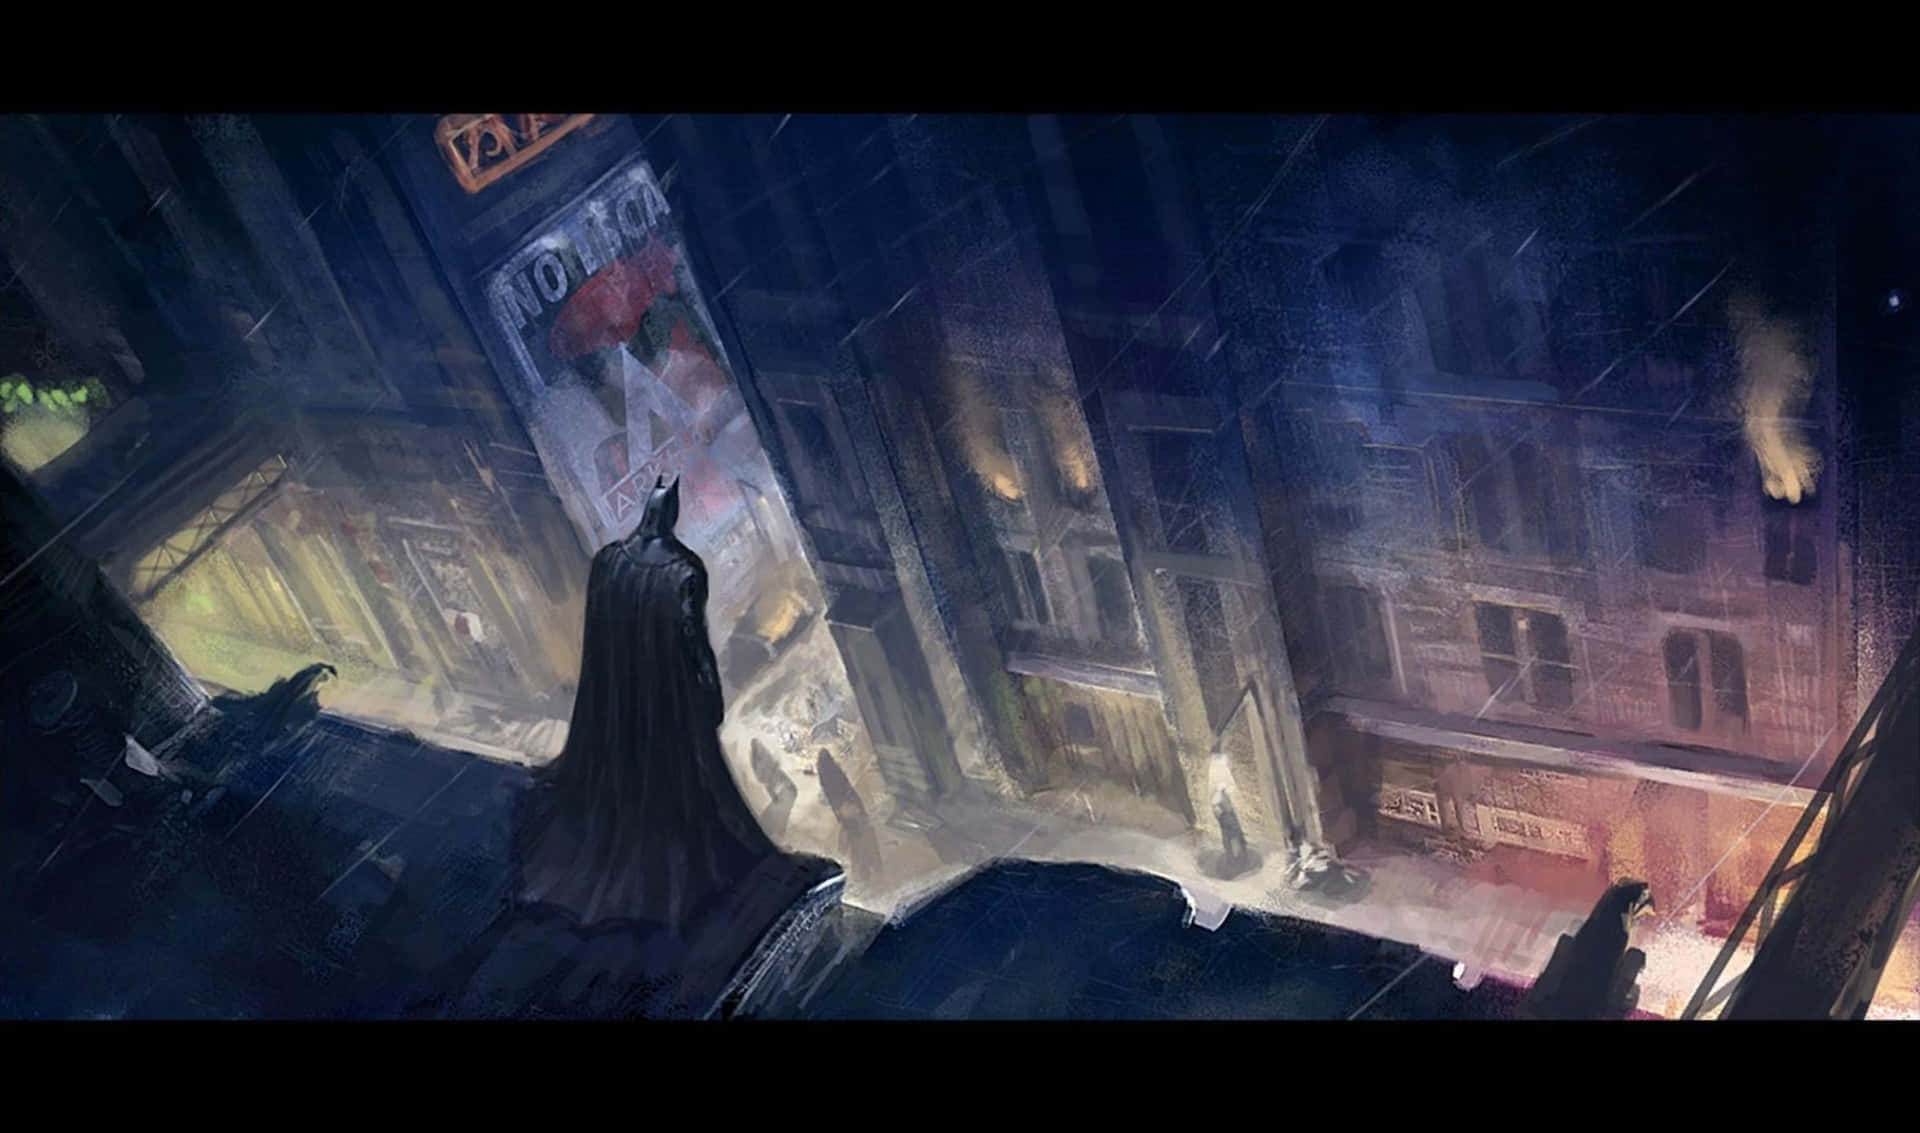 Batman is on the prowl in Arkham City